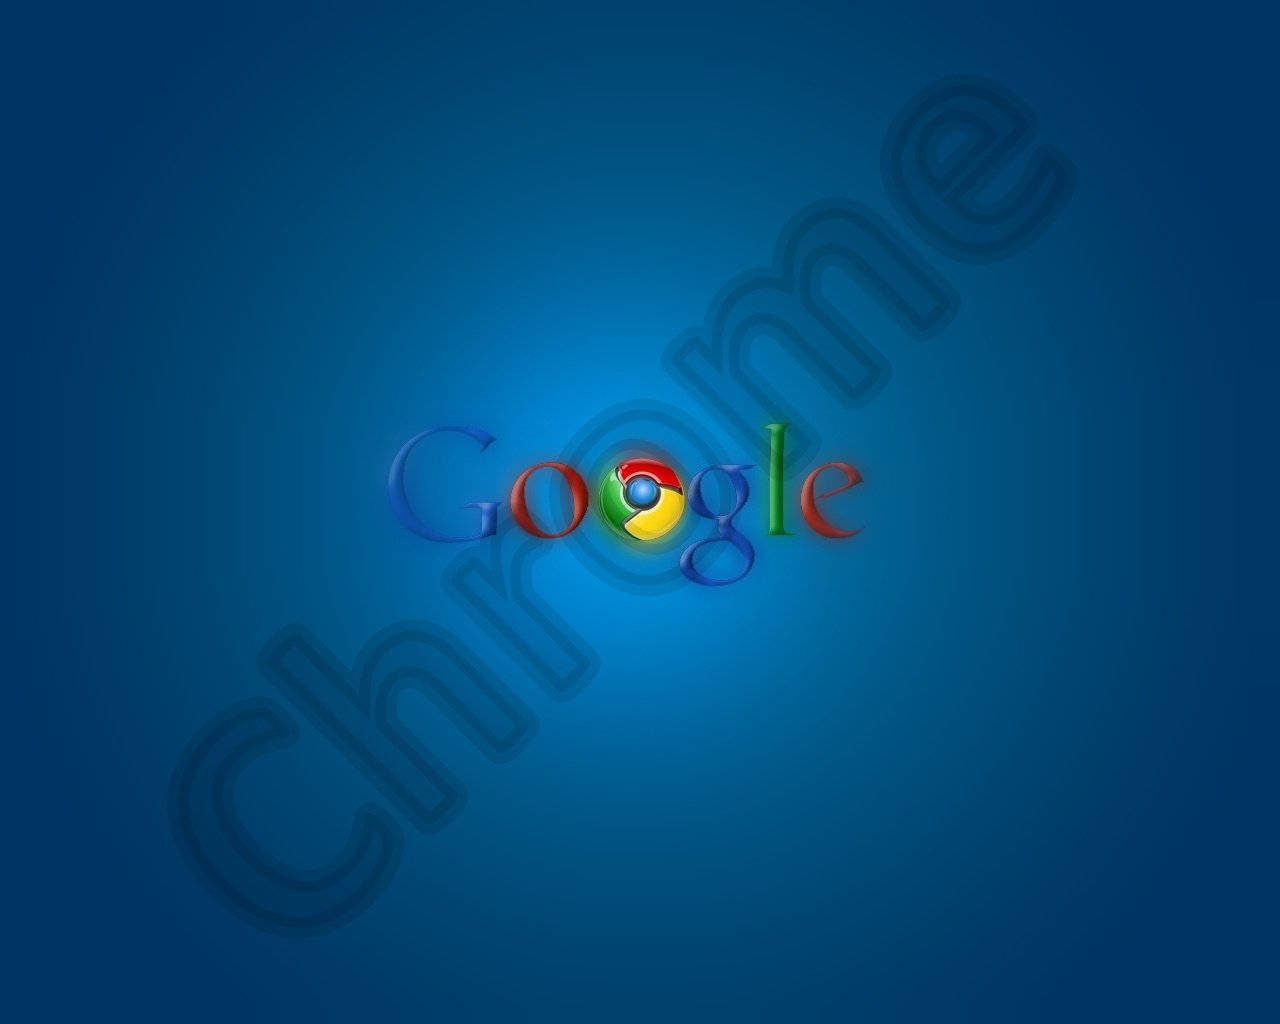 Google Chrome 1280X1024 Wallpaper and Background Image